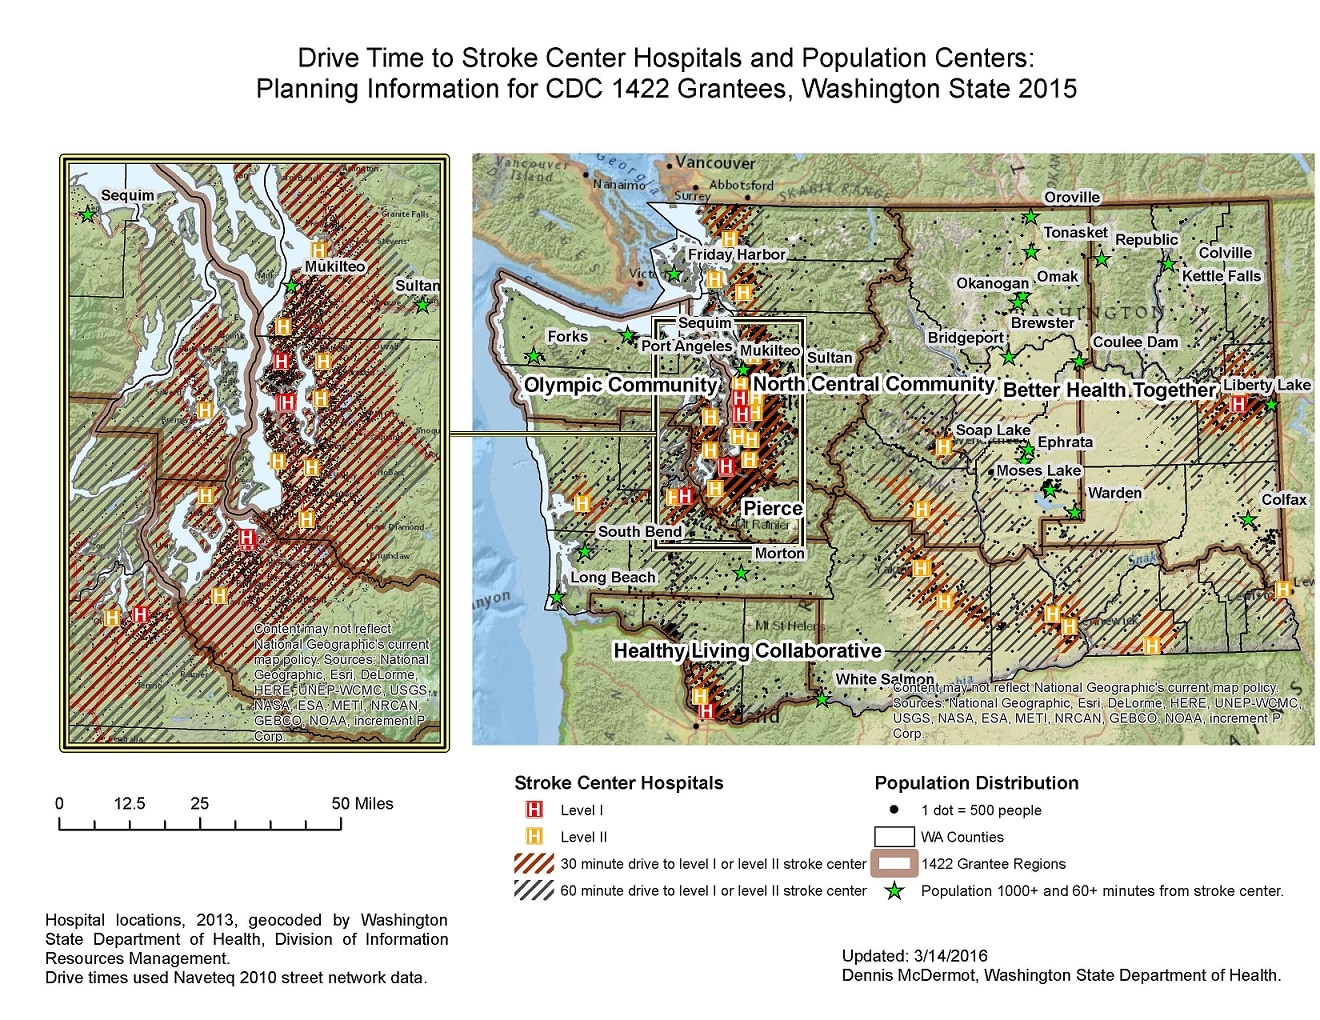 Access to Stroke Center Hospitals in Washington State